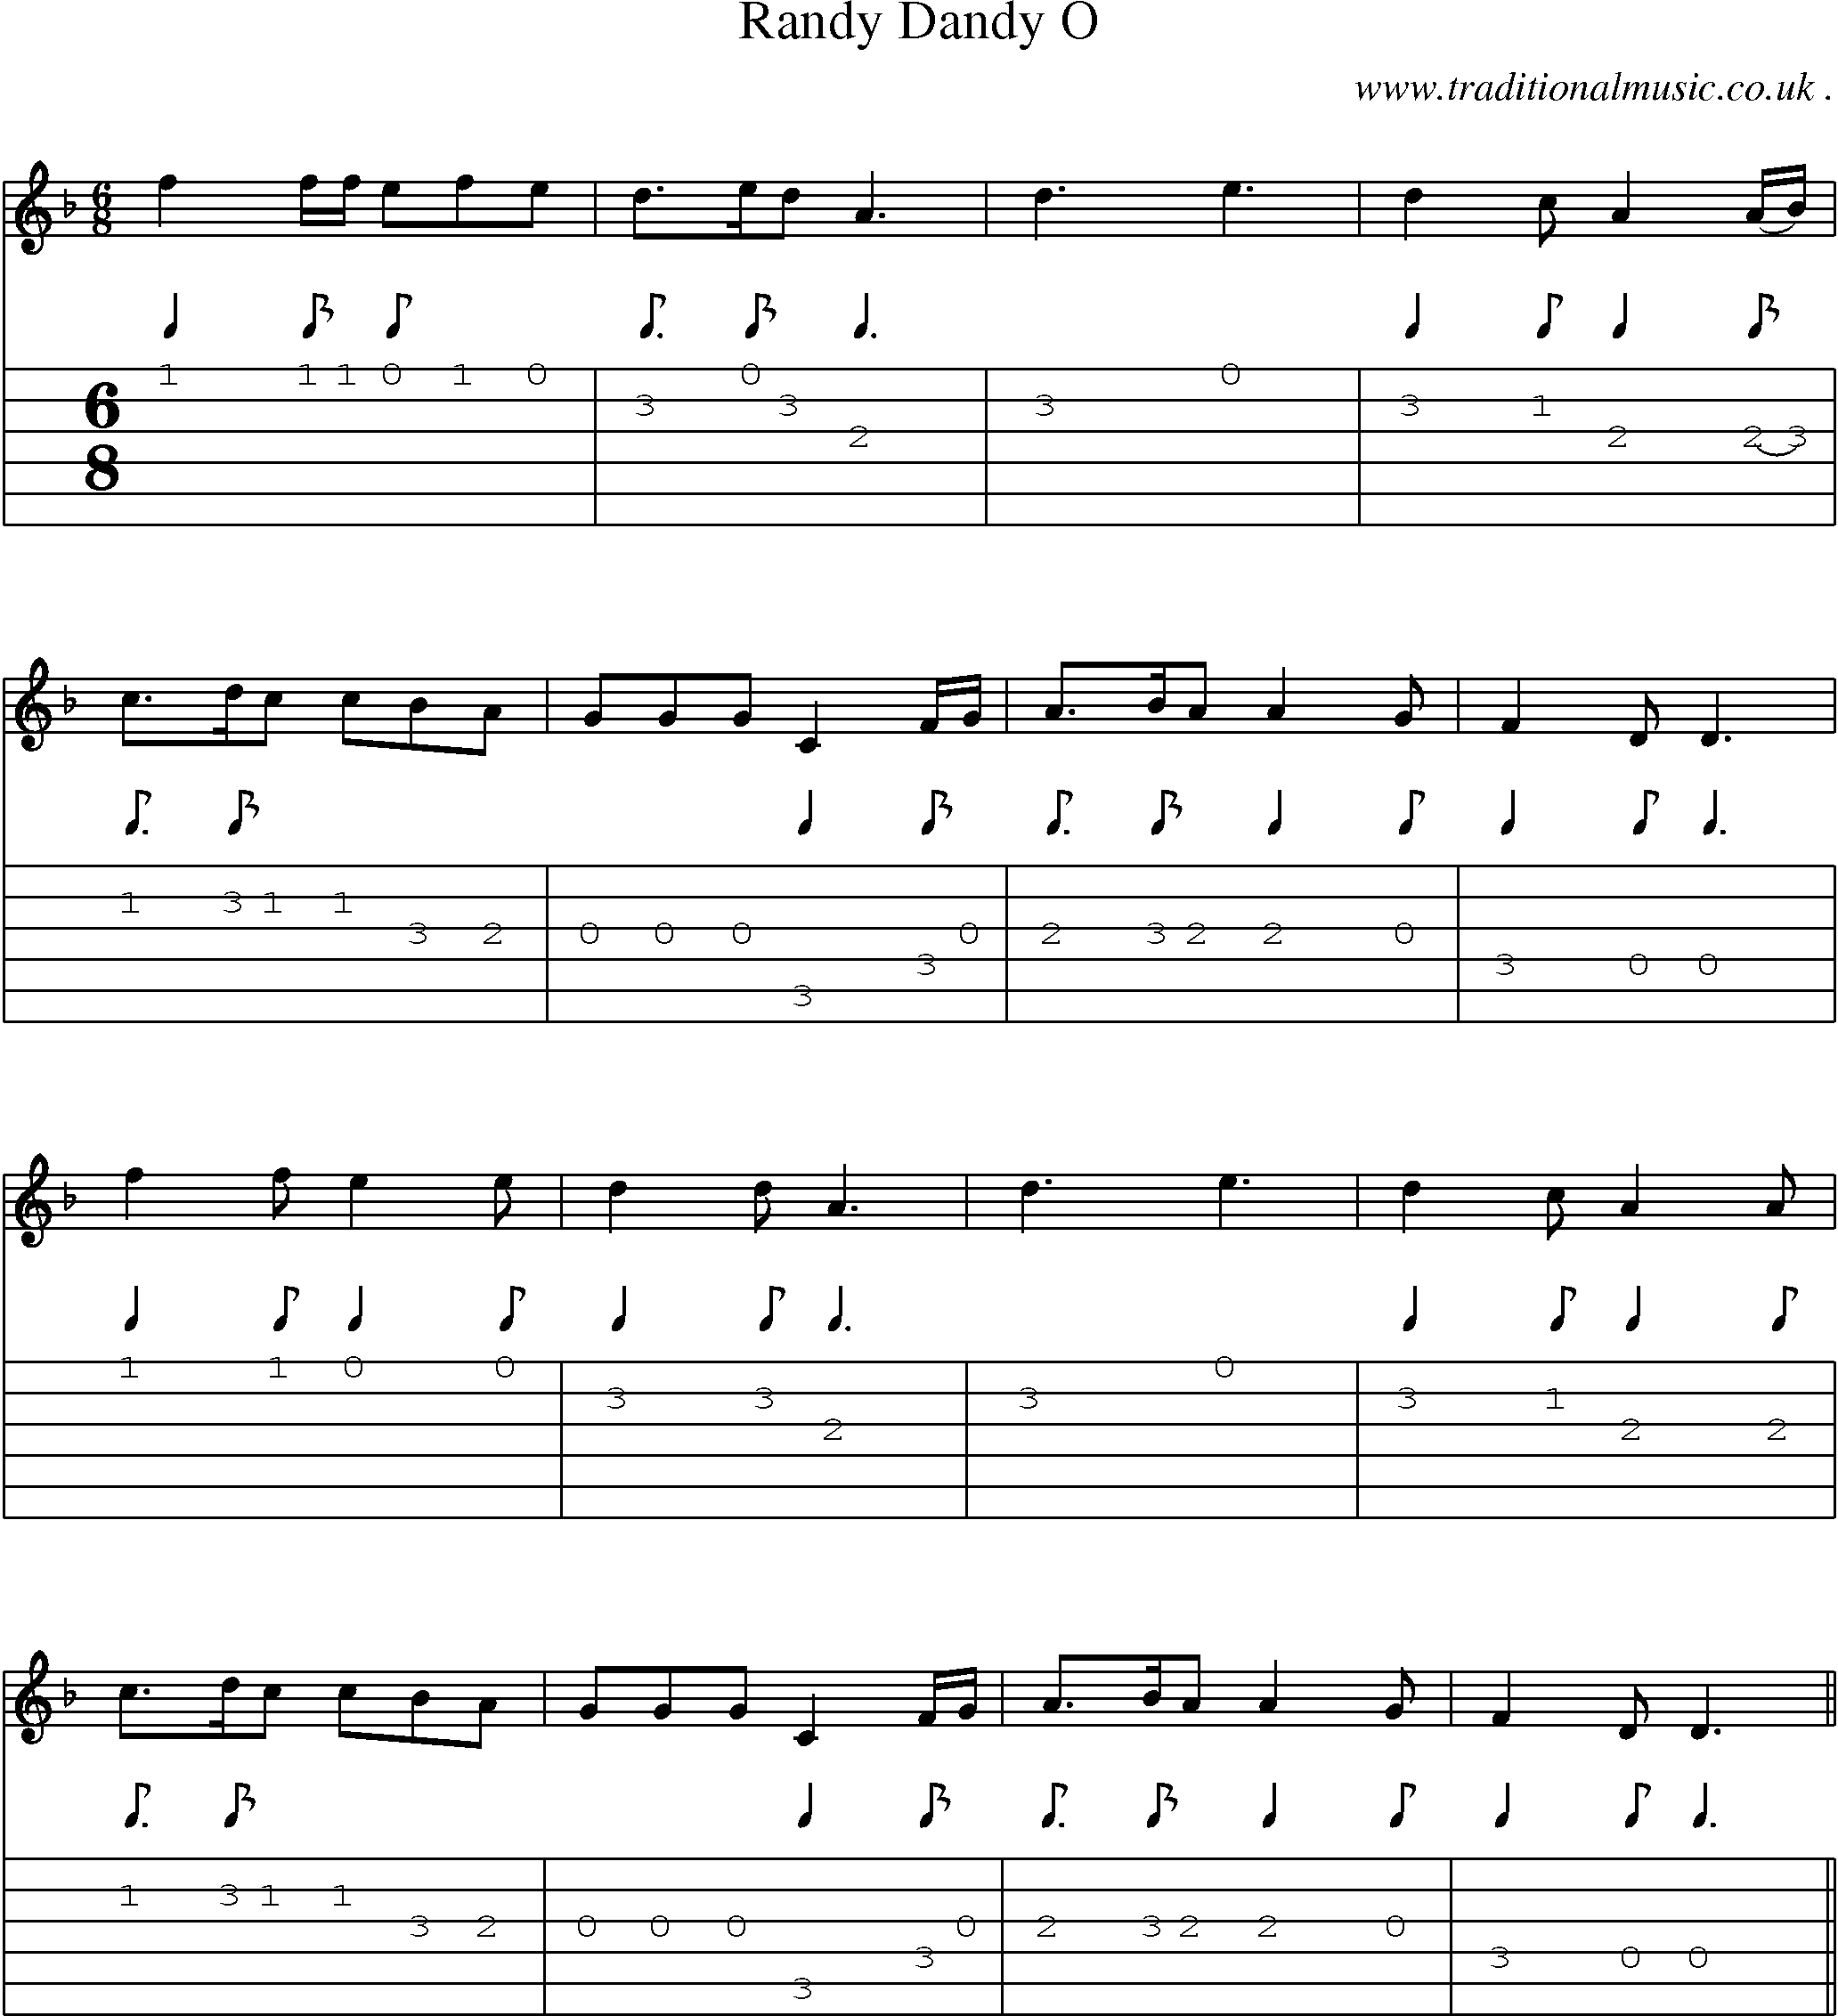 Sheet-Music and Guitar Tabs for Randy Dandy O